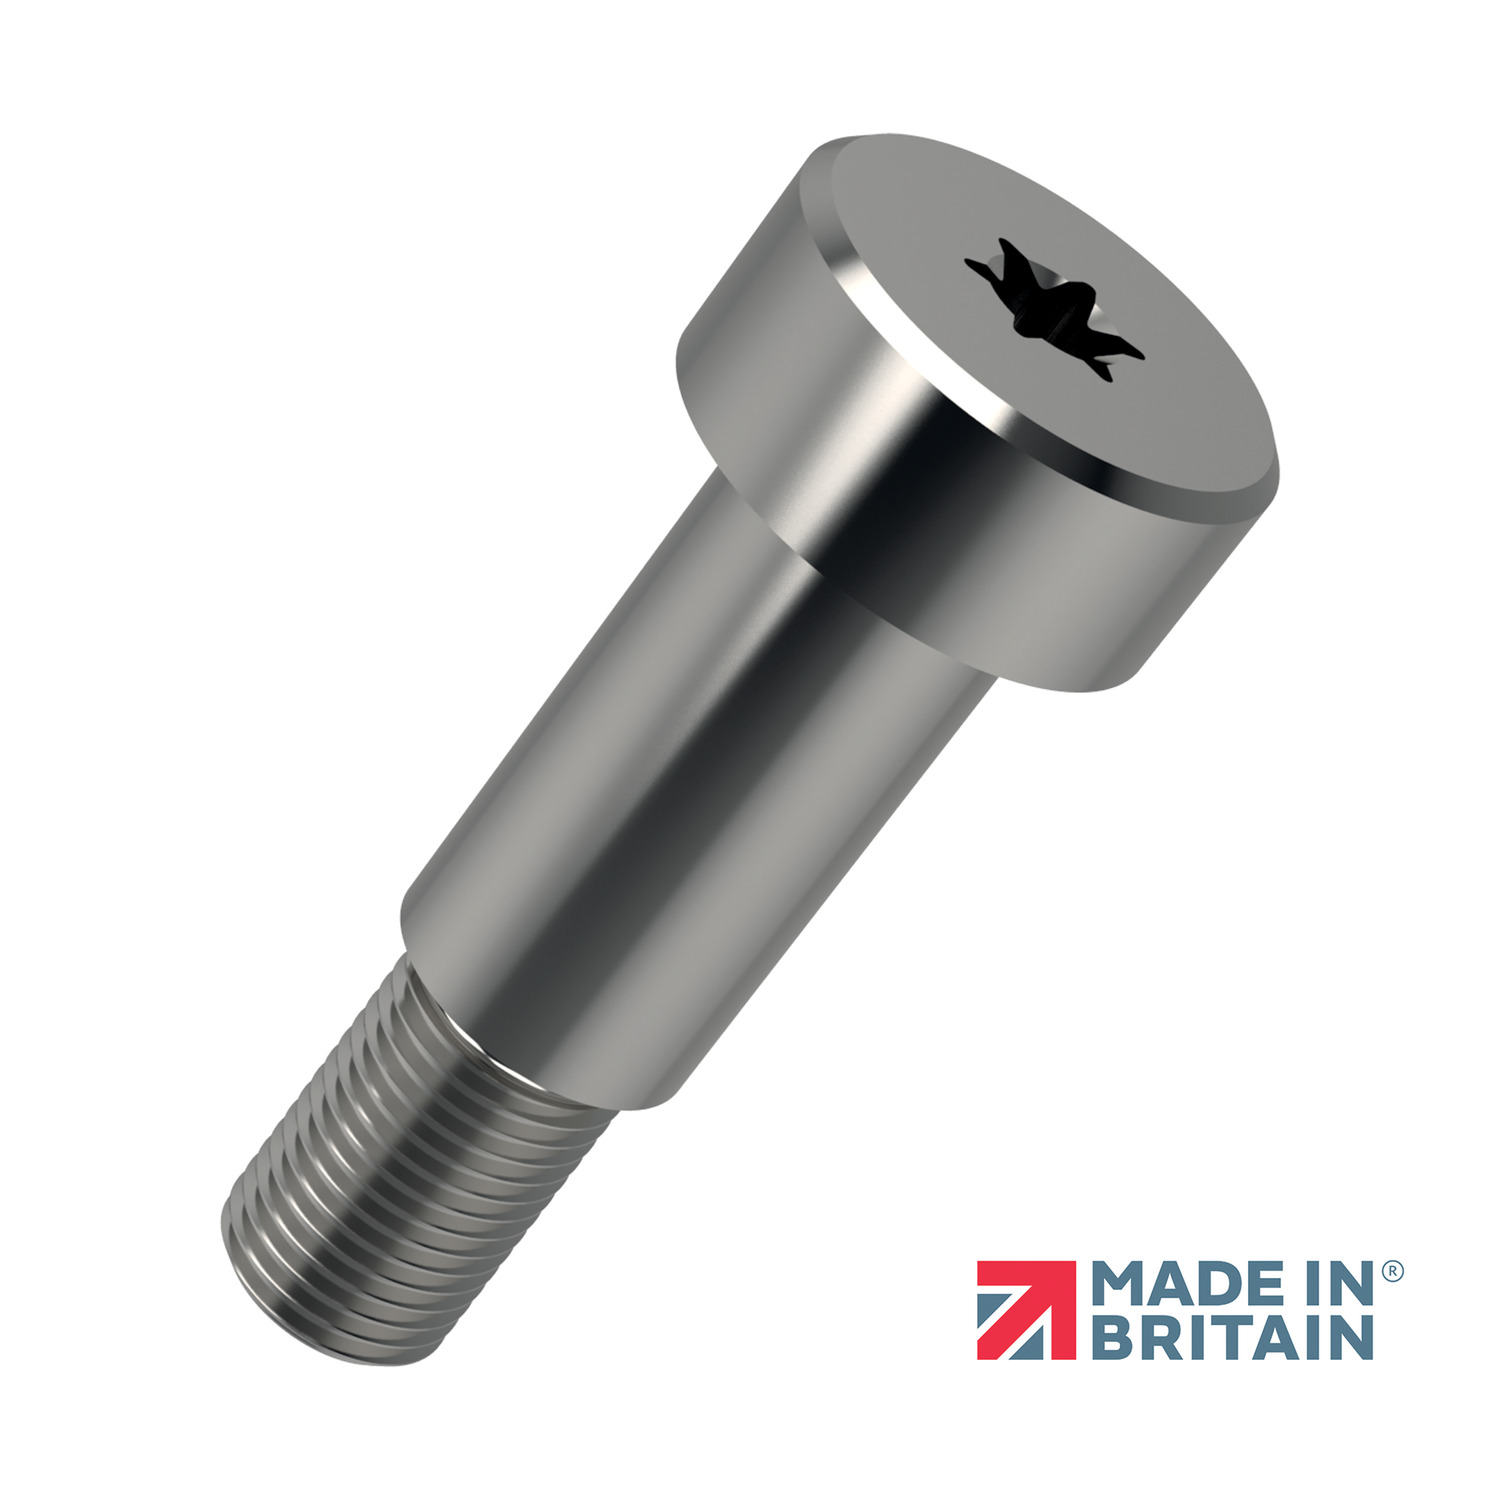 Shoulder Screws - Cap Head Tx head shoulder scre in 303 series stainless steel - also available in black.